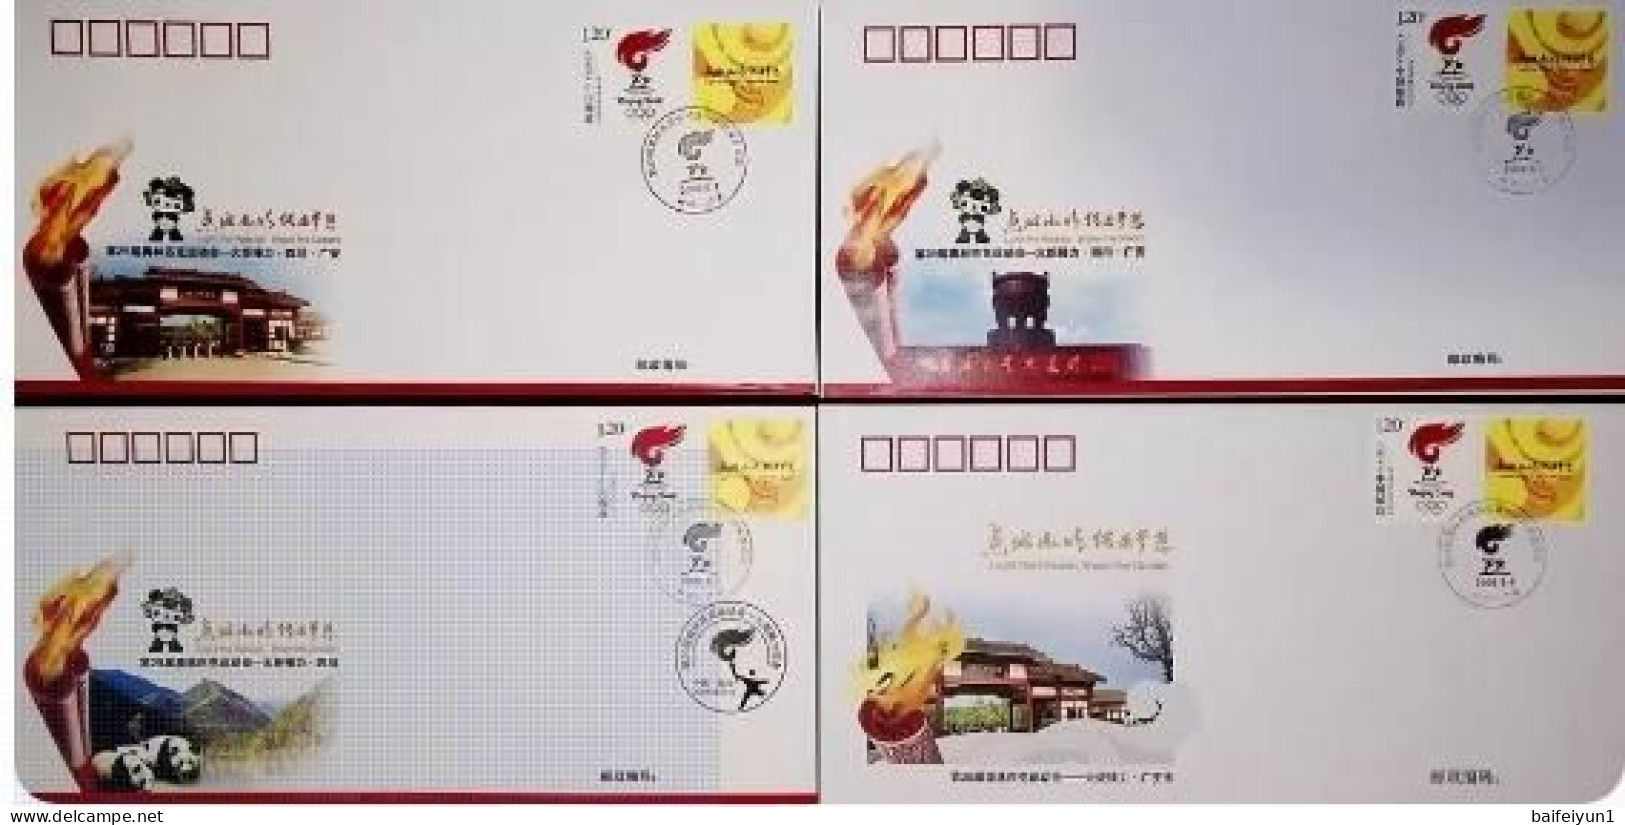 China  2008 BeiJing 2008 Olympic Game Torch Relay -guang`an Commemorative Covers - Covers